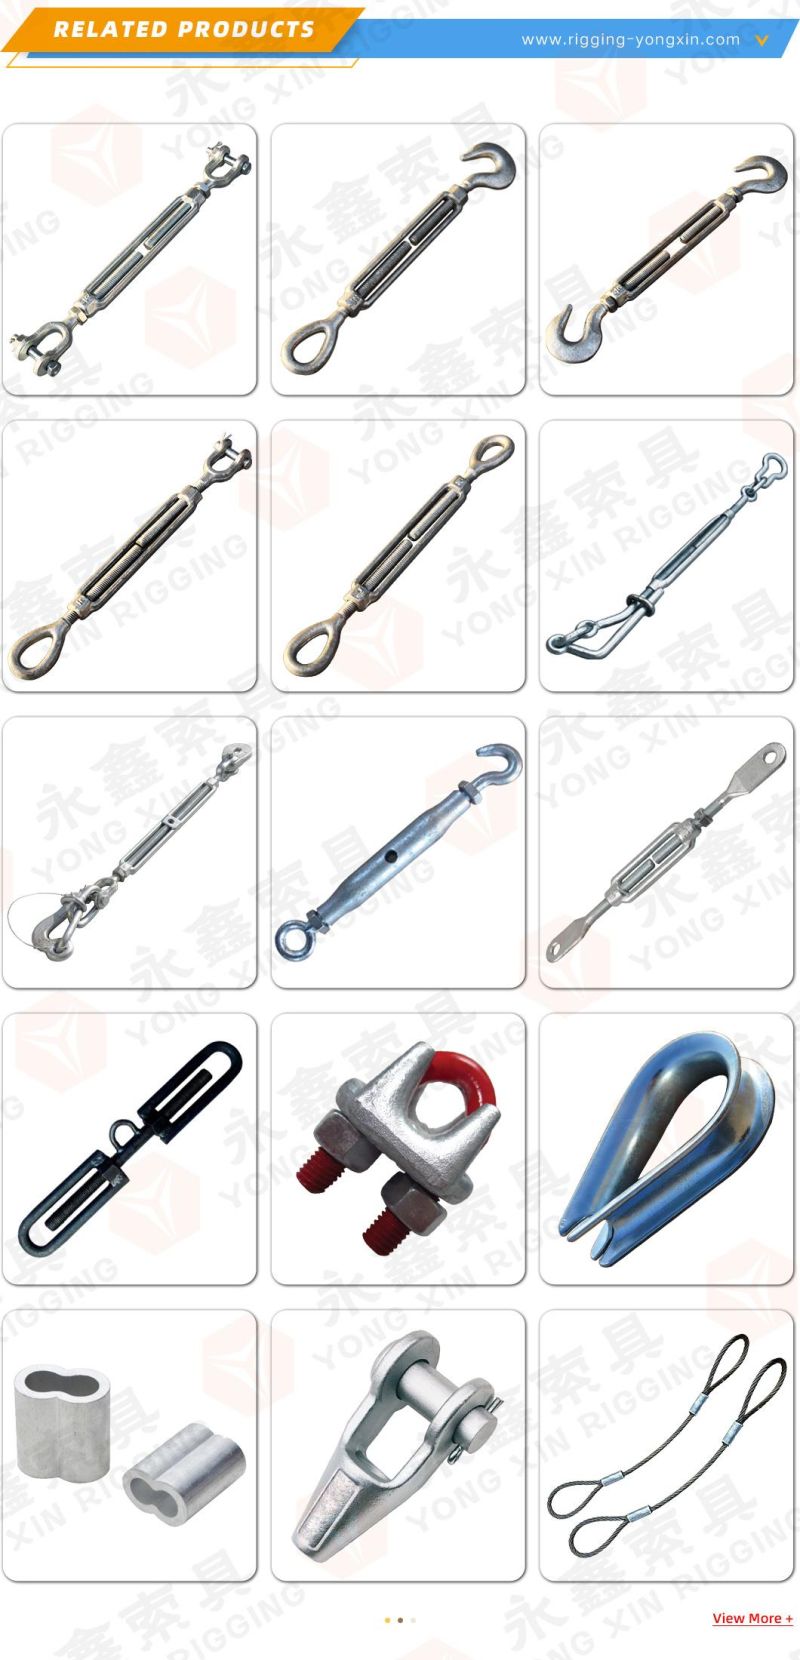 Hot Sale Rigging Hardware Cable Fittings Stainless Steel 316 Us Type G411 Wire Rope Thimbles